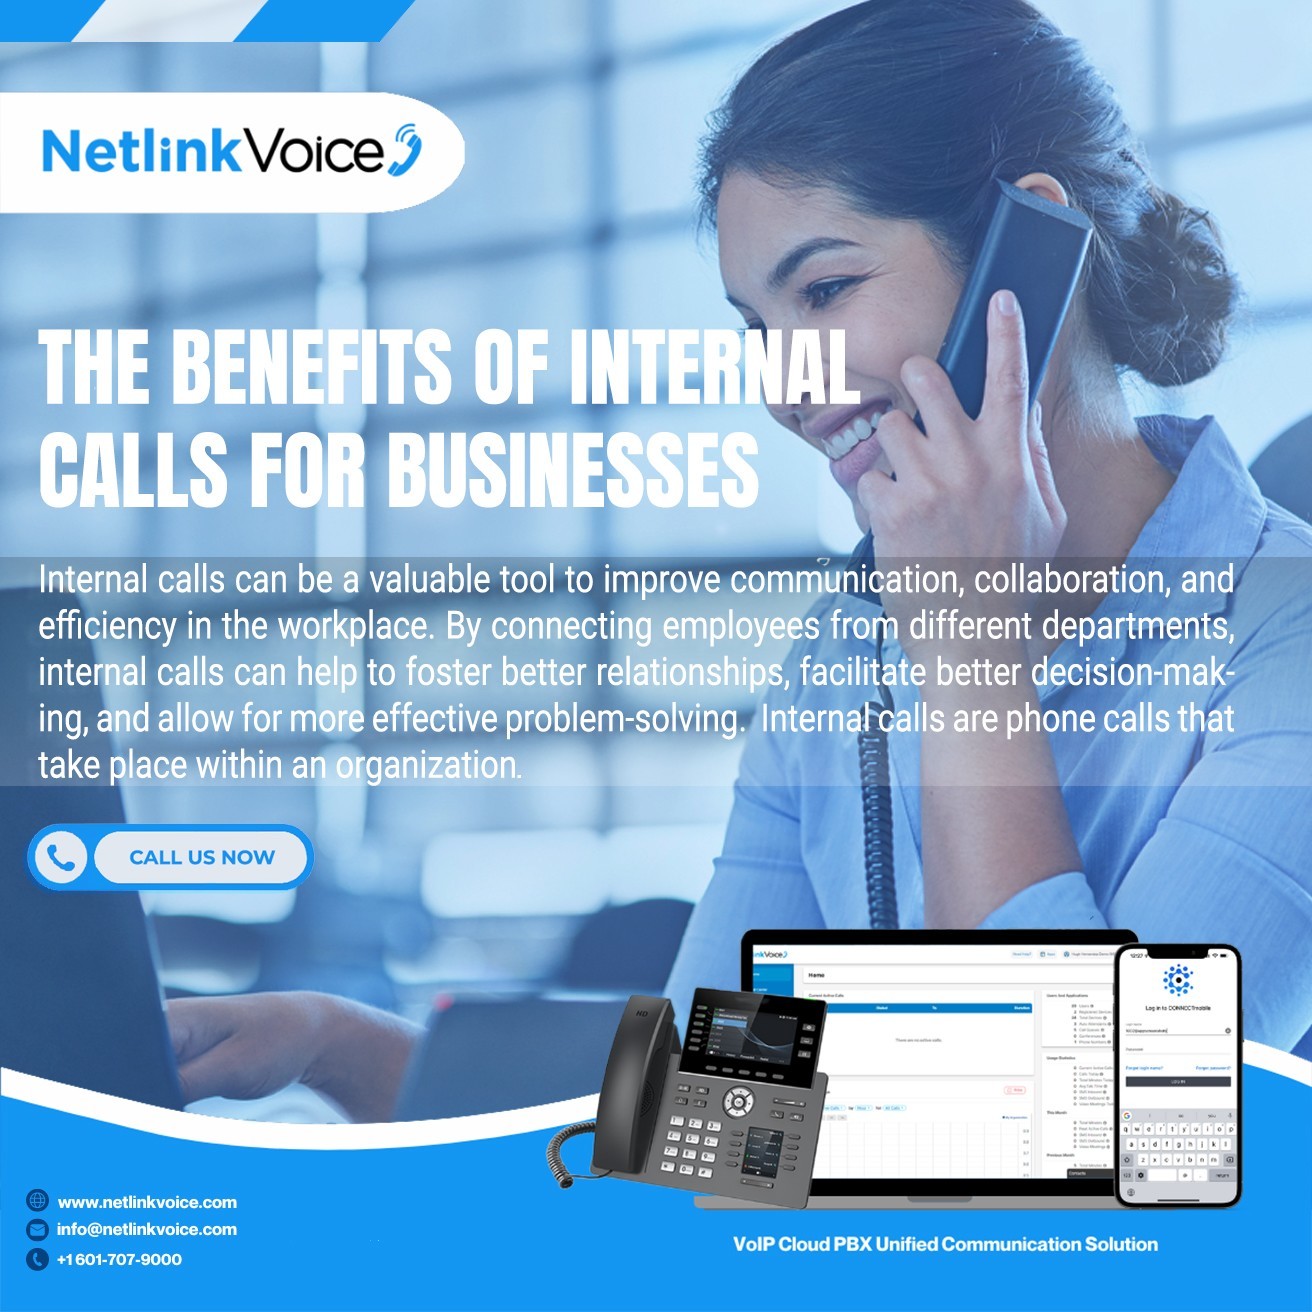 The Benefits of Internal Calls for Businesses